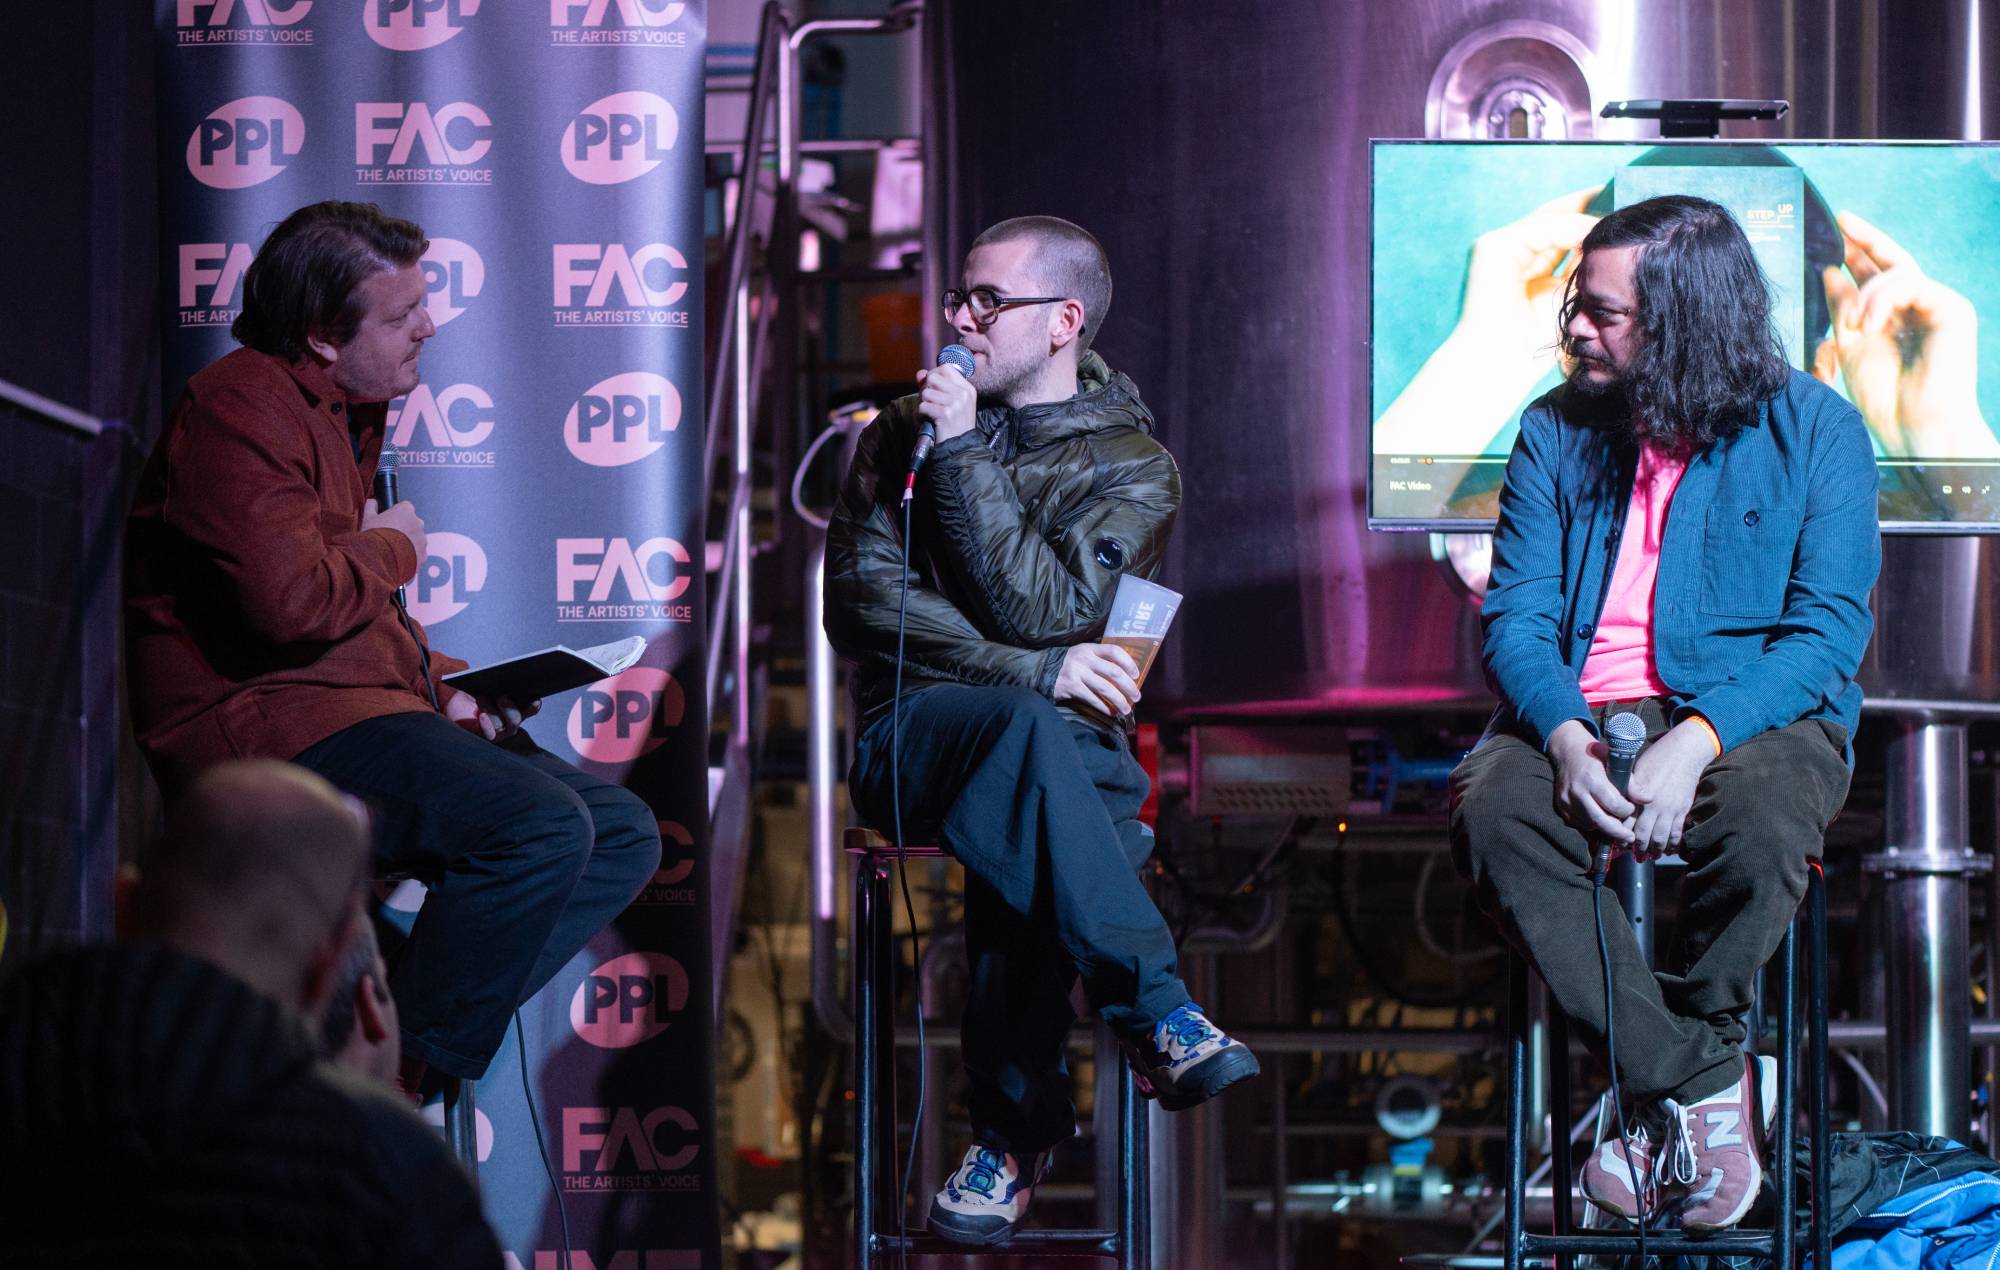 NME's Andrew Trendell interviews Murray Matravers of the band FKA Easy Life and Sam Duckworth of Get Cape. Wear Cape. Fly at the 2023 FAC AGM. Credit: Jeremy Strong